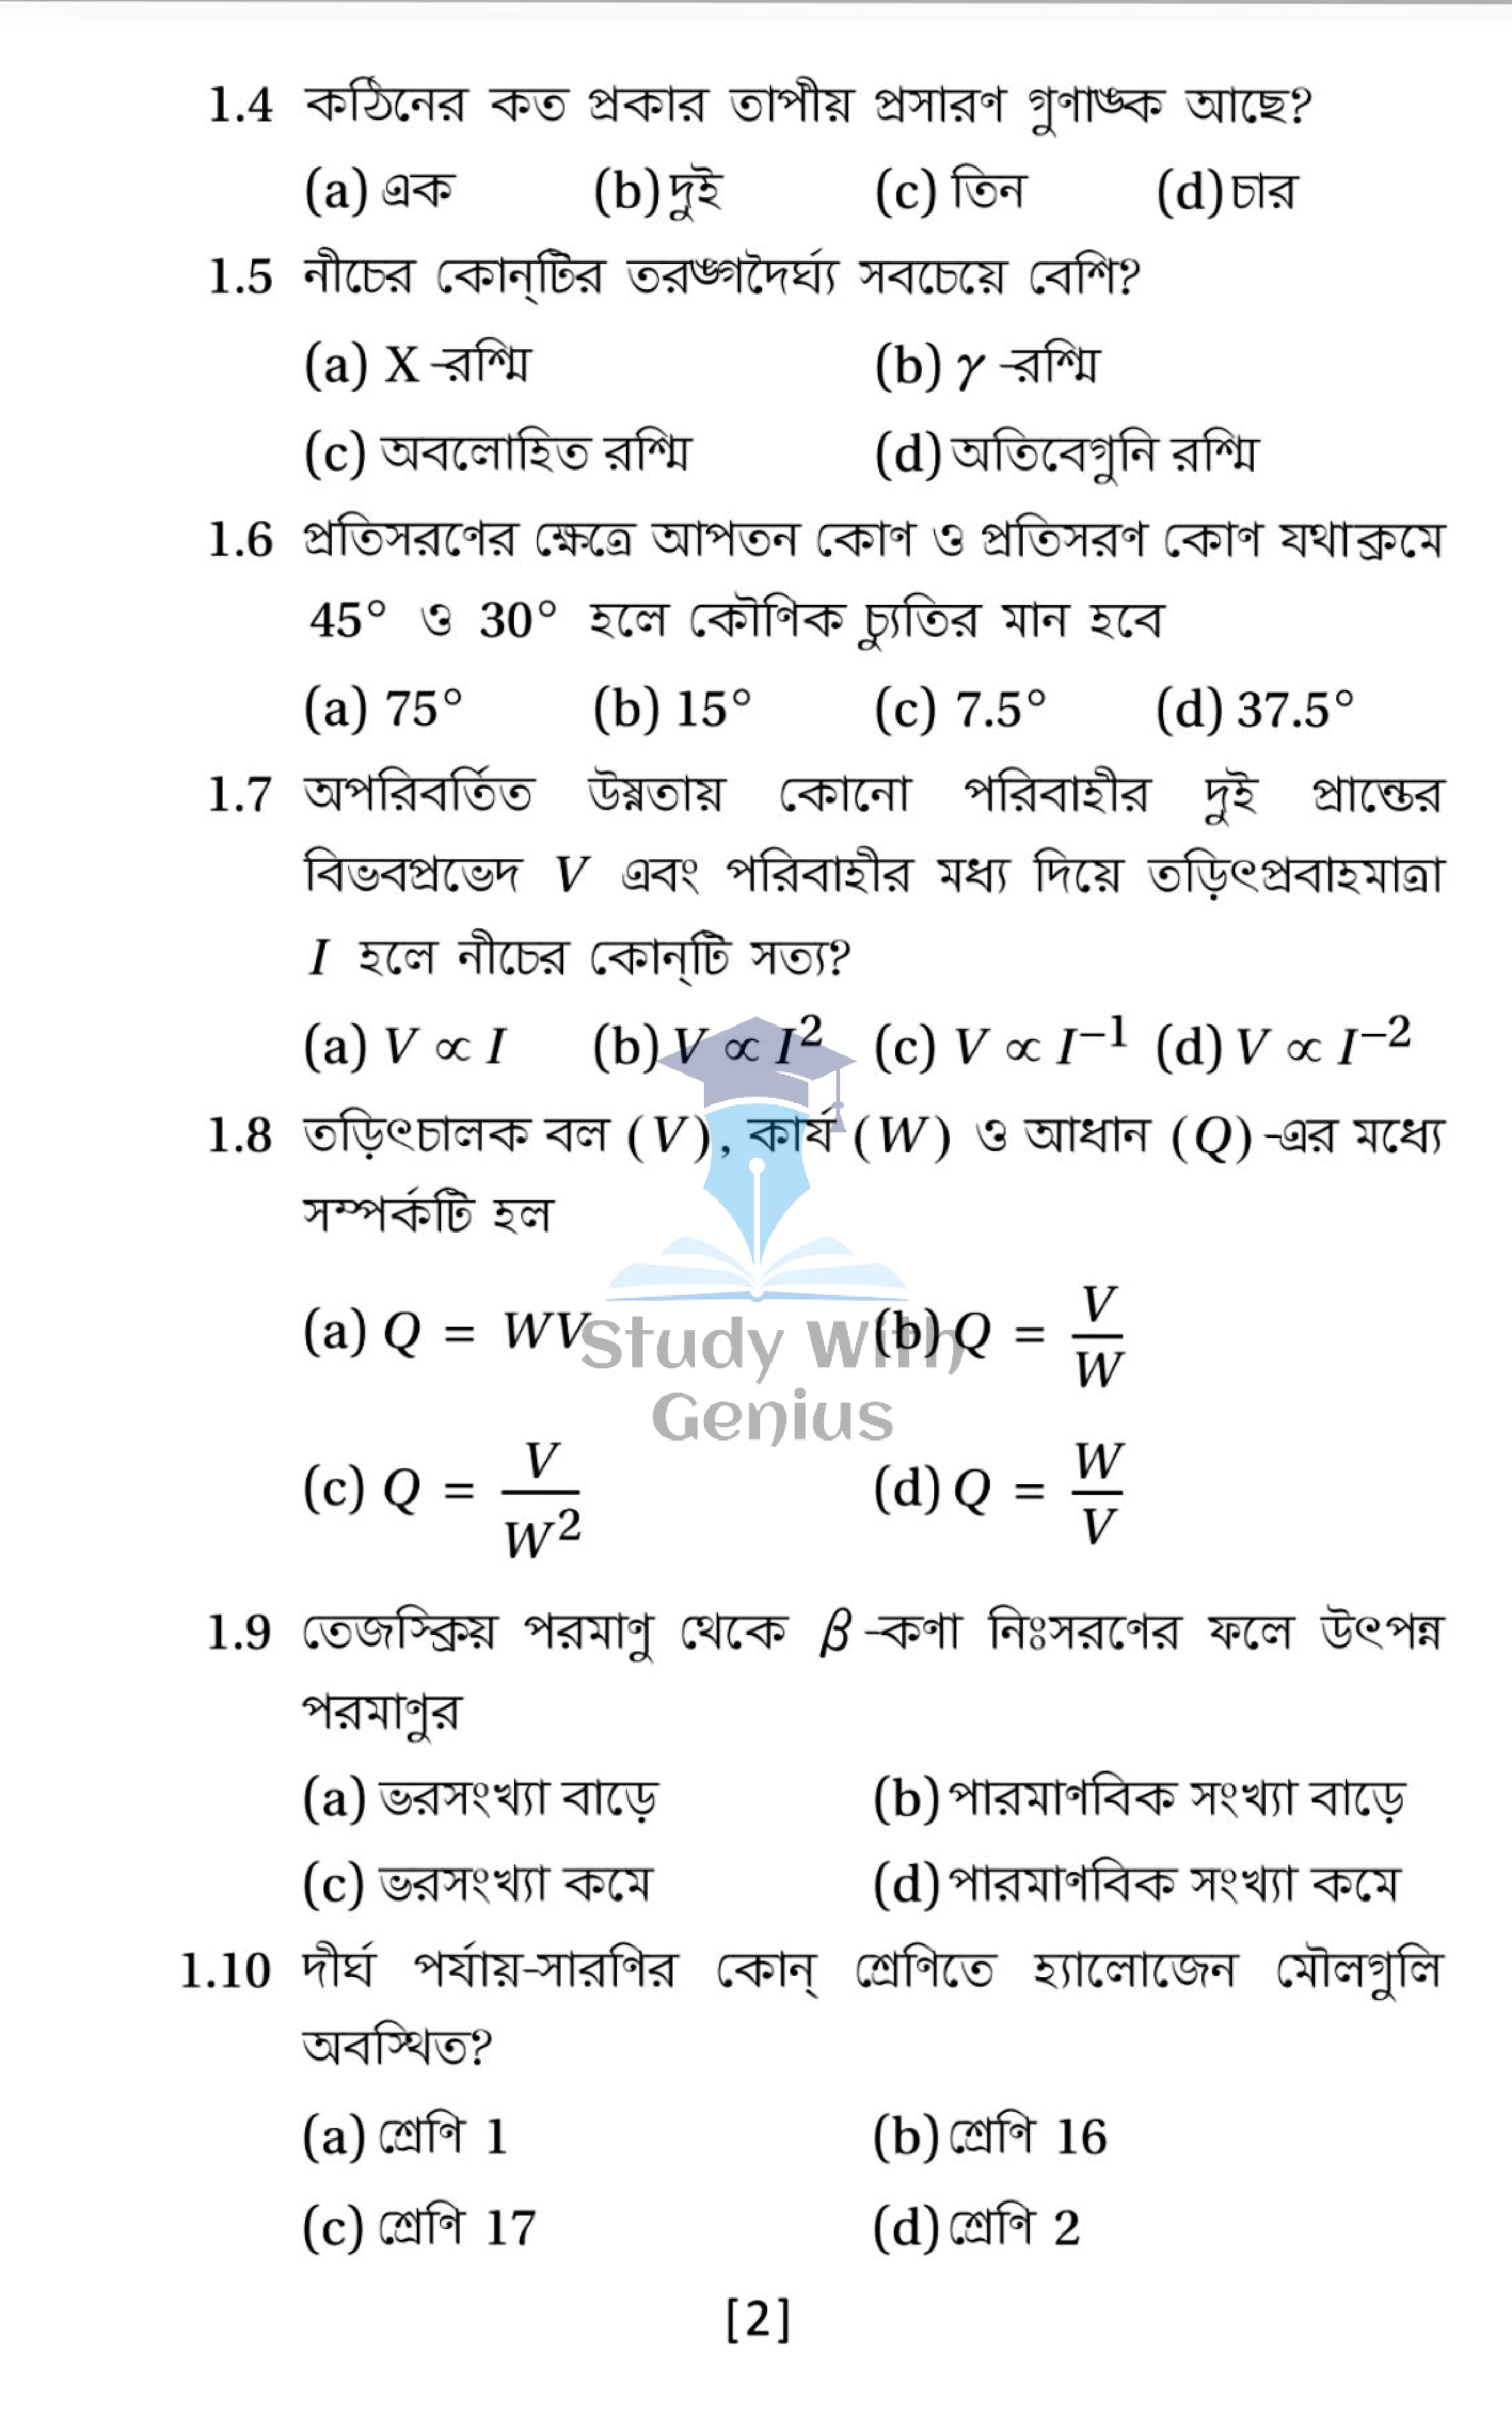 WBBSE Madhyamik Physical Science Subject Question Papers Bengali Medium 2020